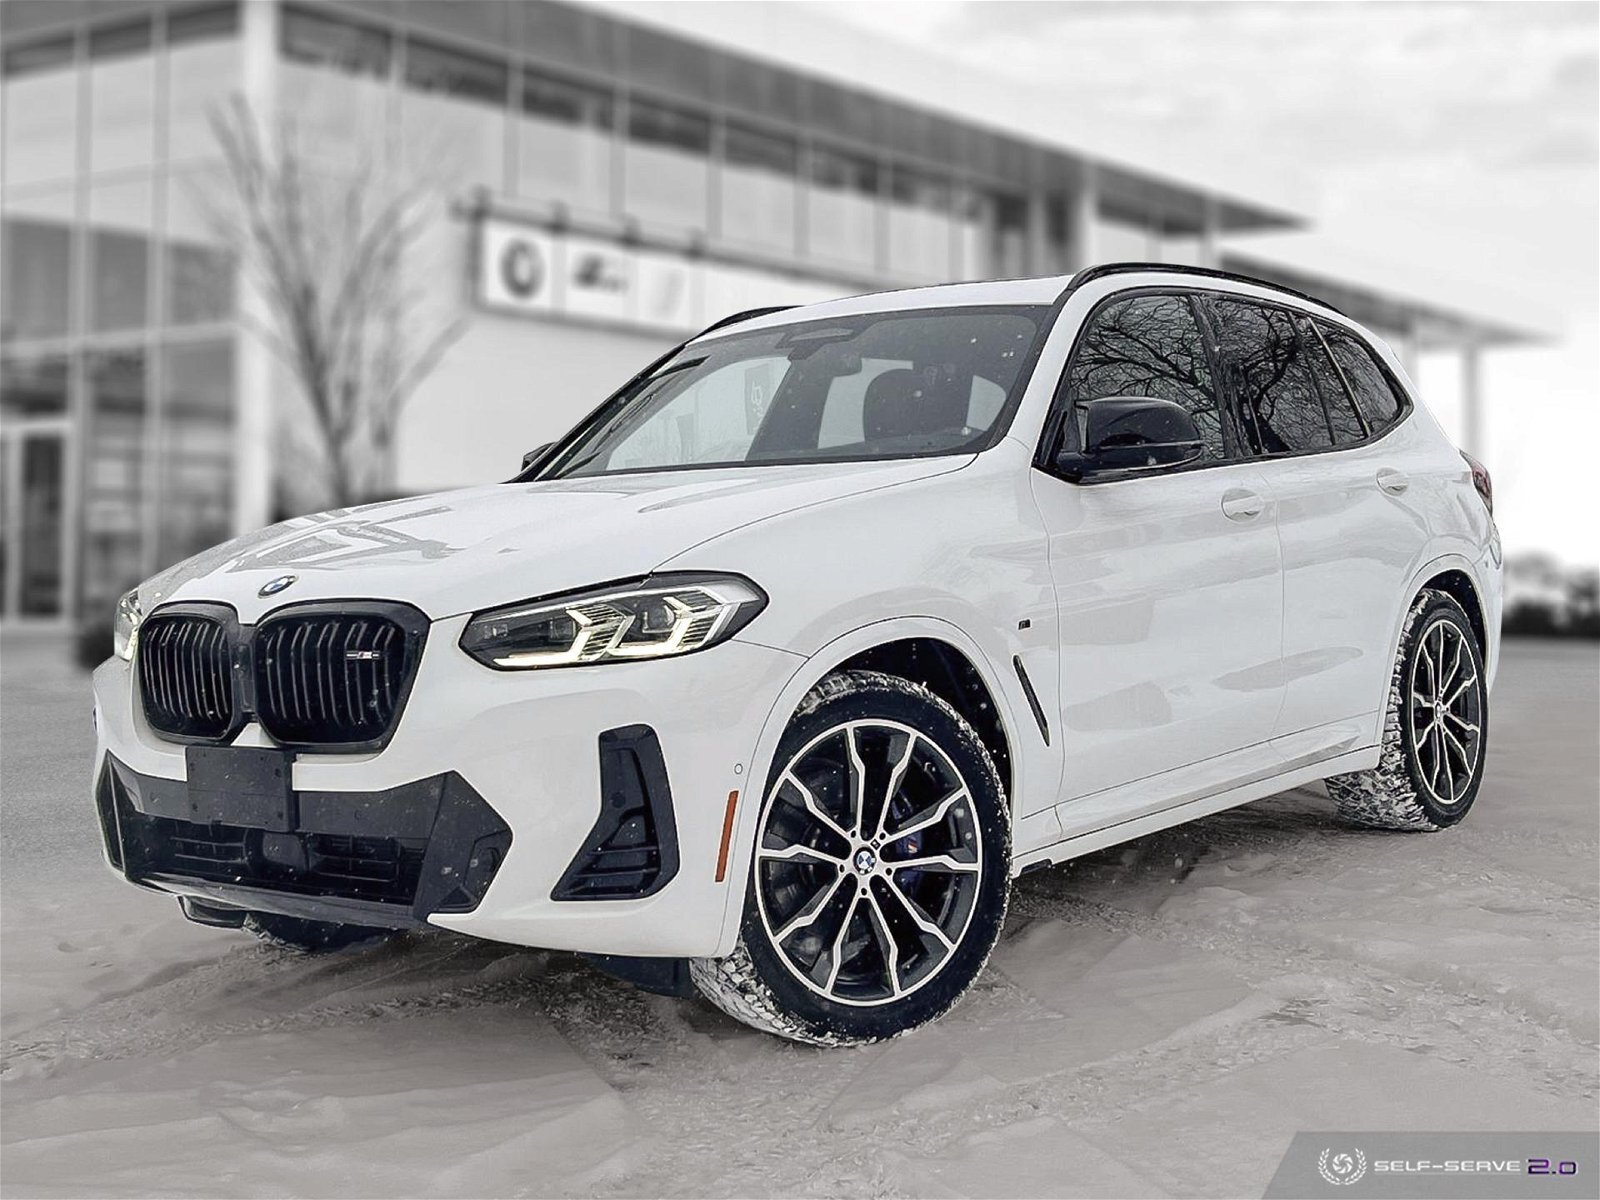 2022 BMW X3 M40i Sold and Delivered!